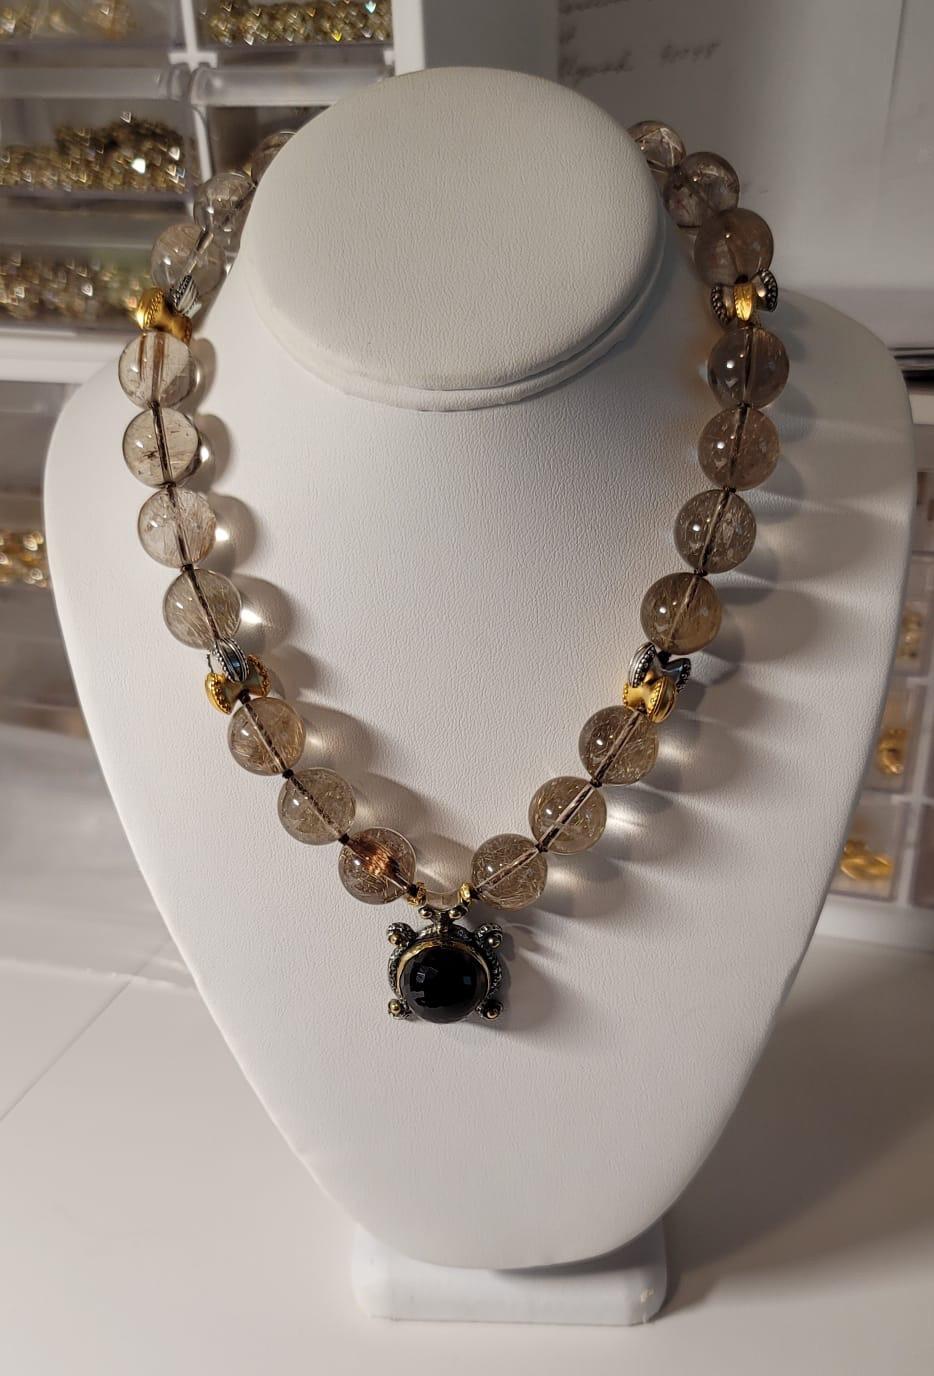 One-of-a-Kind

18m.m carefully matched rutilated quartz polished beads strung between sterling silver and vermeil bow knots suspends an elegant Bora handcrafted silver and brass faceted pendant holds a brilliant faceted large smoky quartz stone.
The